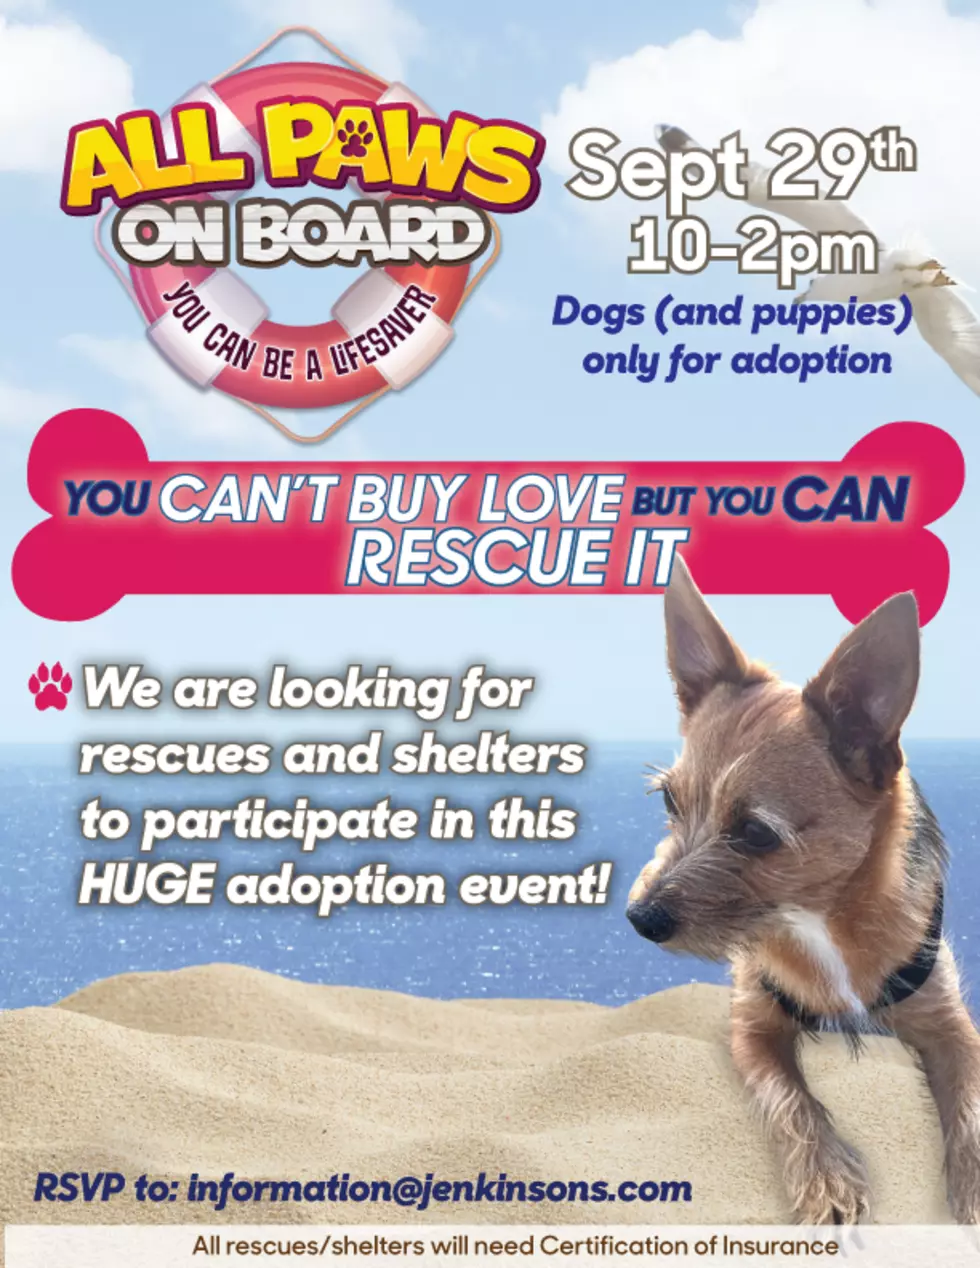 Rescue a Dog at Jenkinson's Beach!